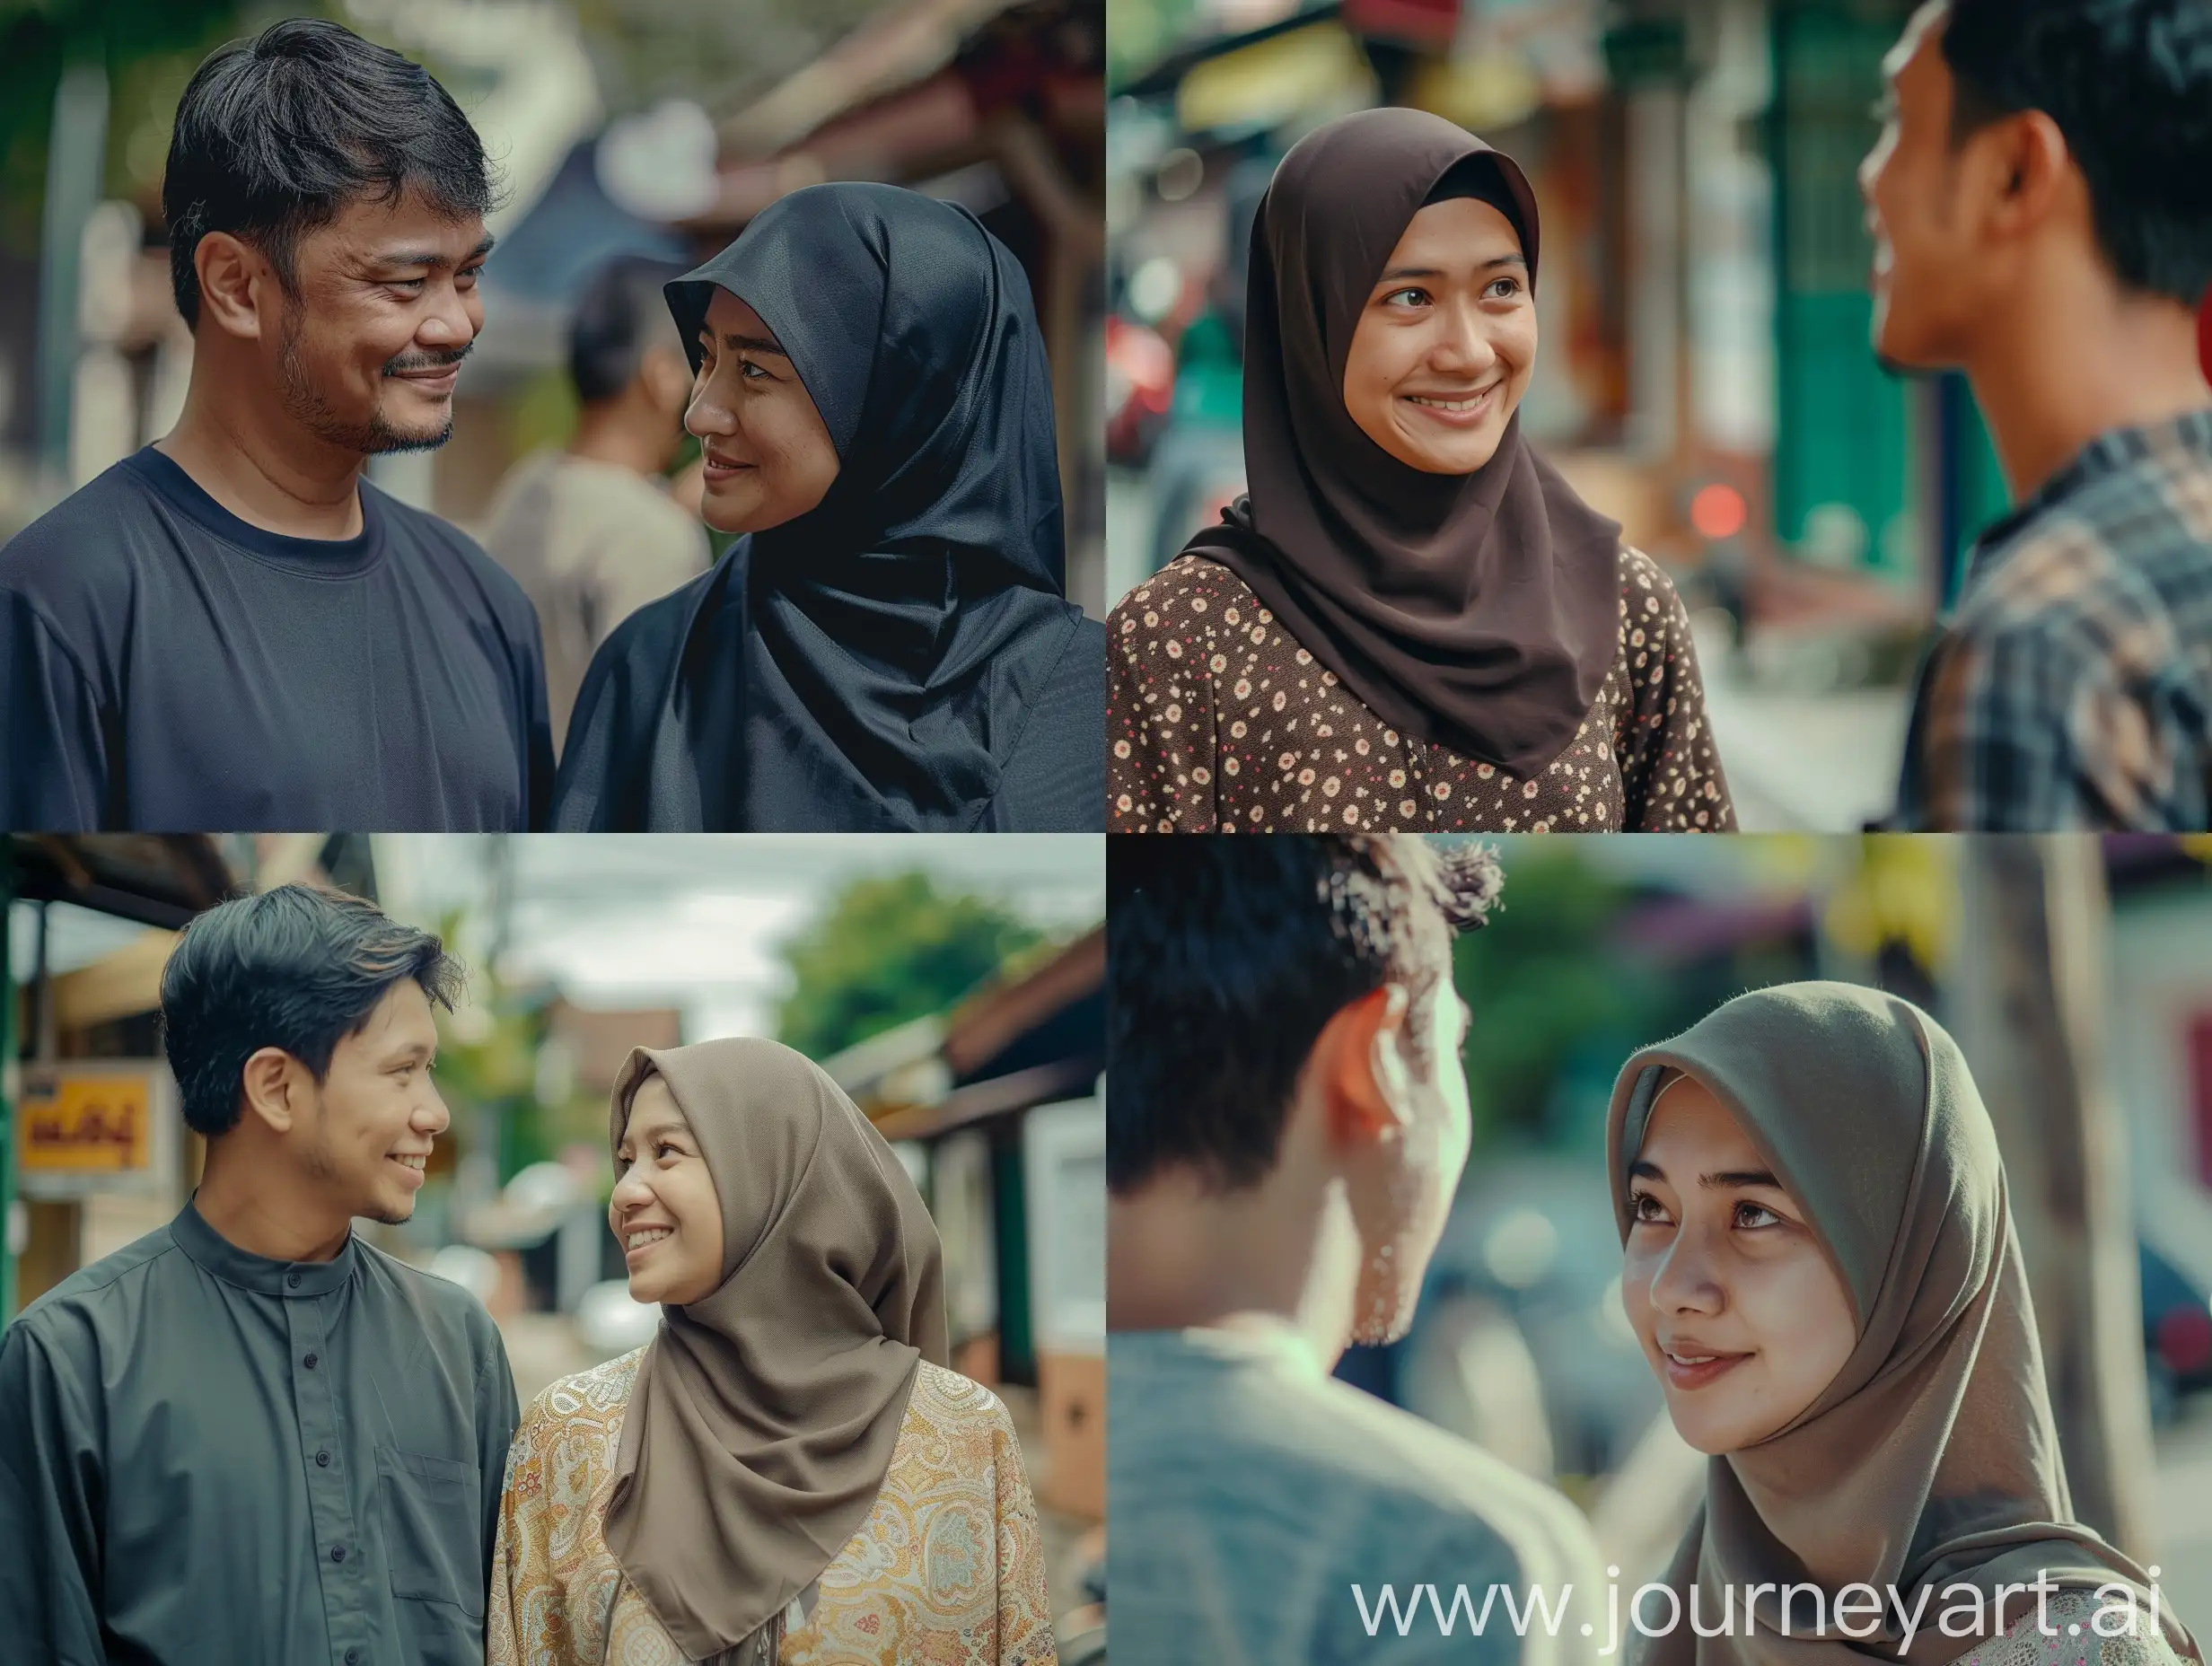 Poster film, an indonesia man, 27 years old, who is in love with a woman wearing a hijab